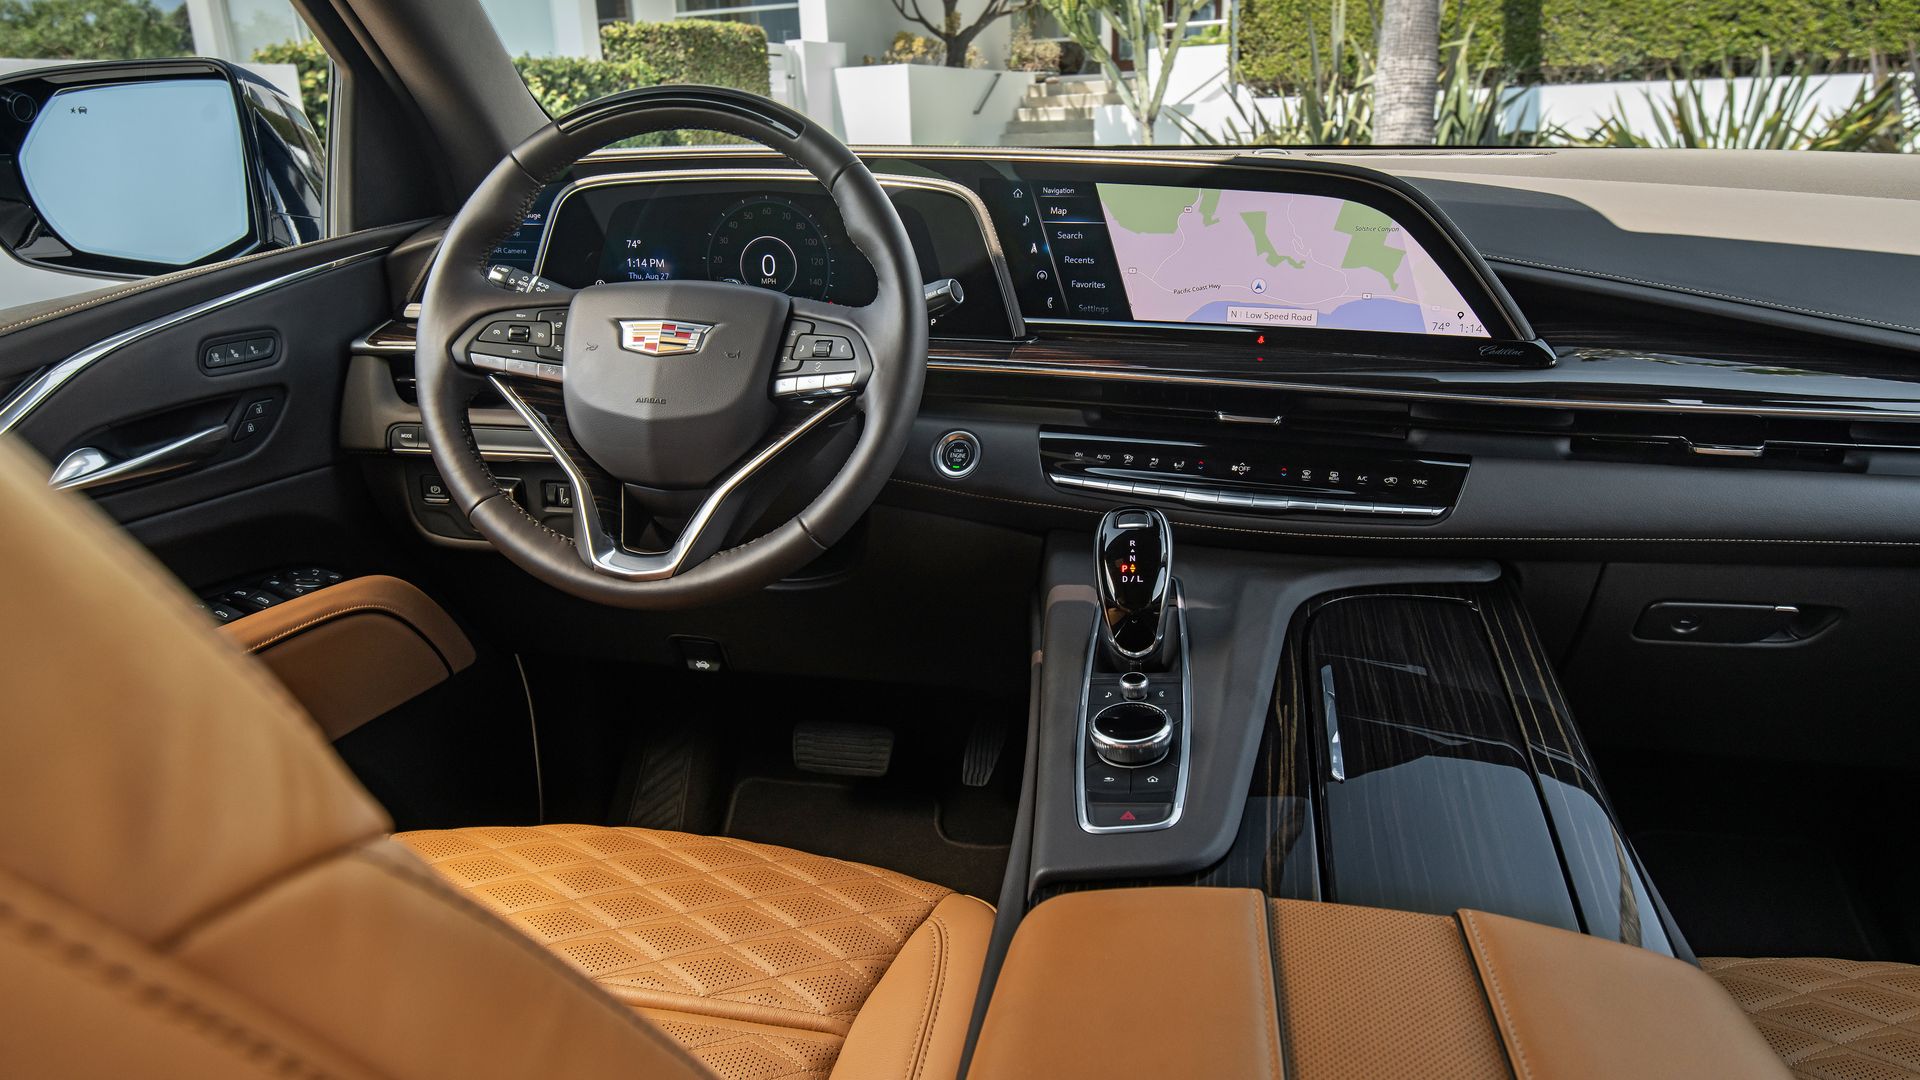 Image of 2021 Cadillac Escalade's curved 33-inch dashboard screen